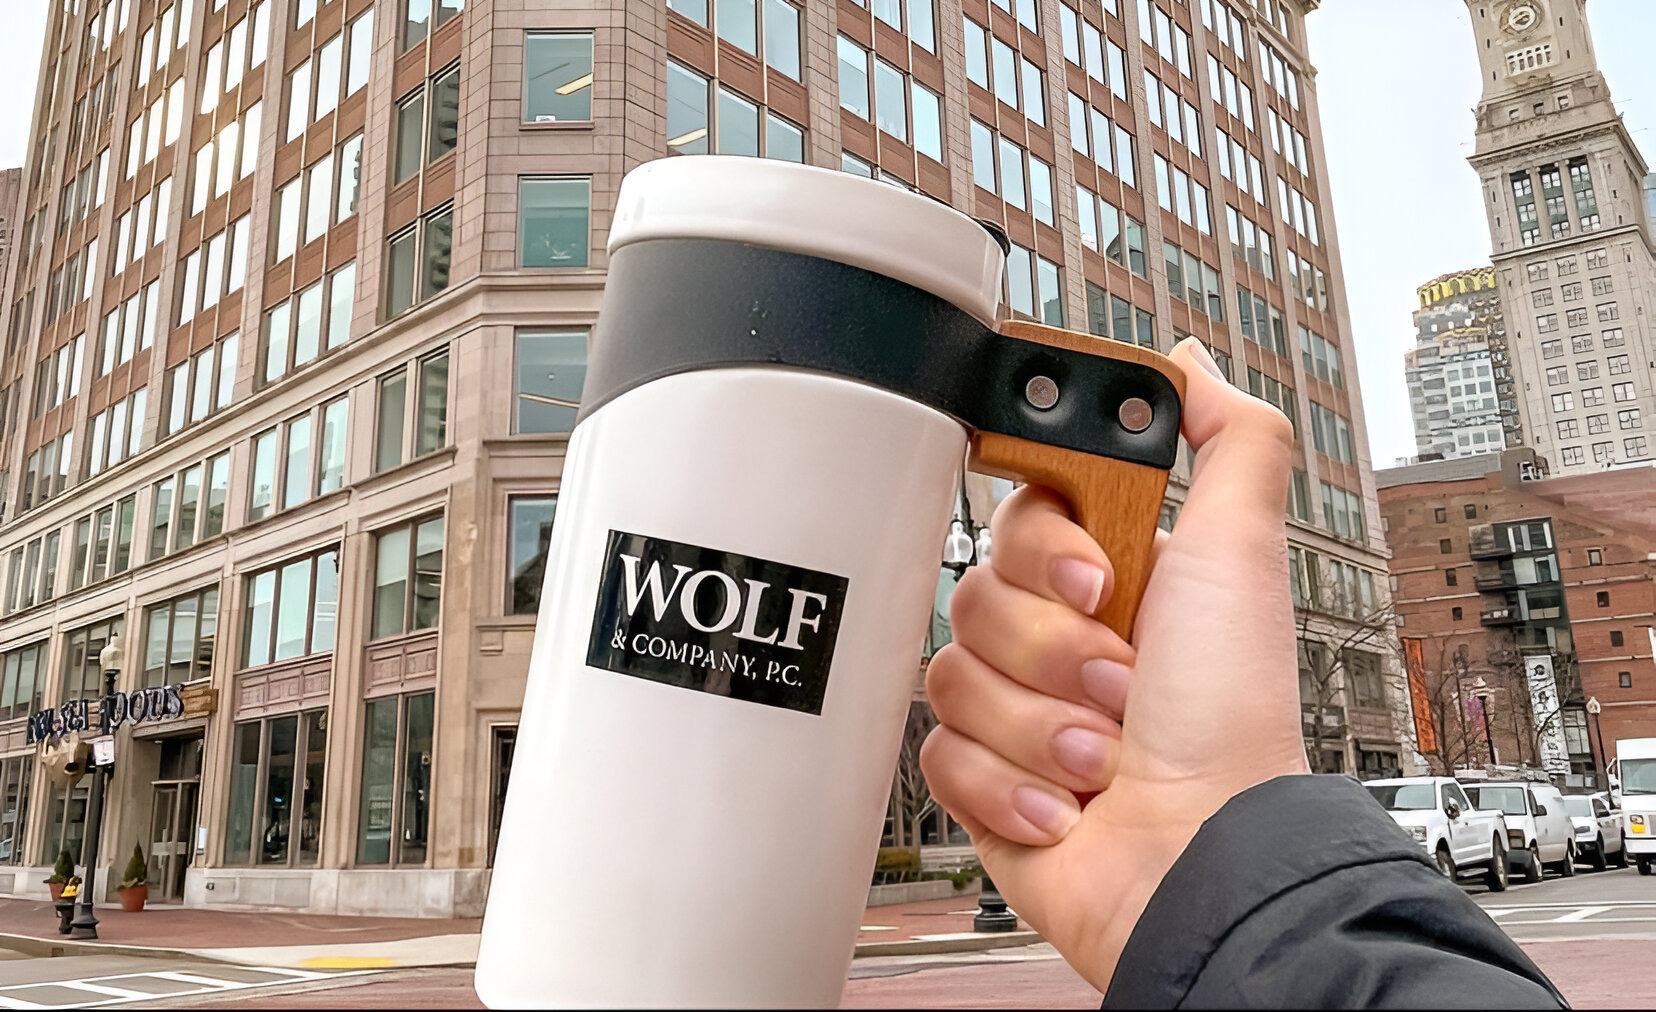 Wolf & Company Expands by Acquiring Treehouse Technology Group